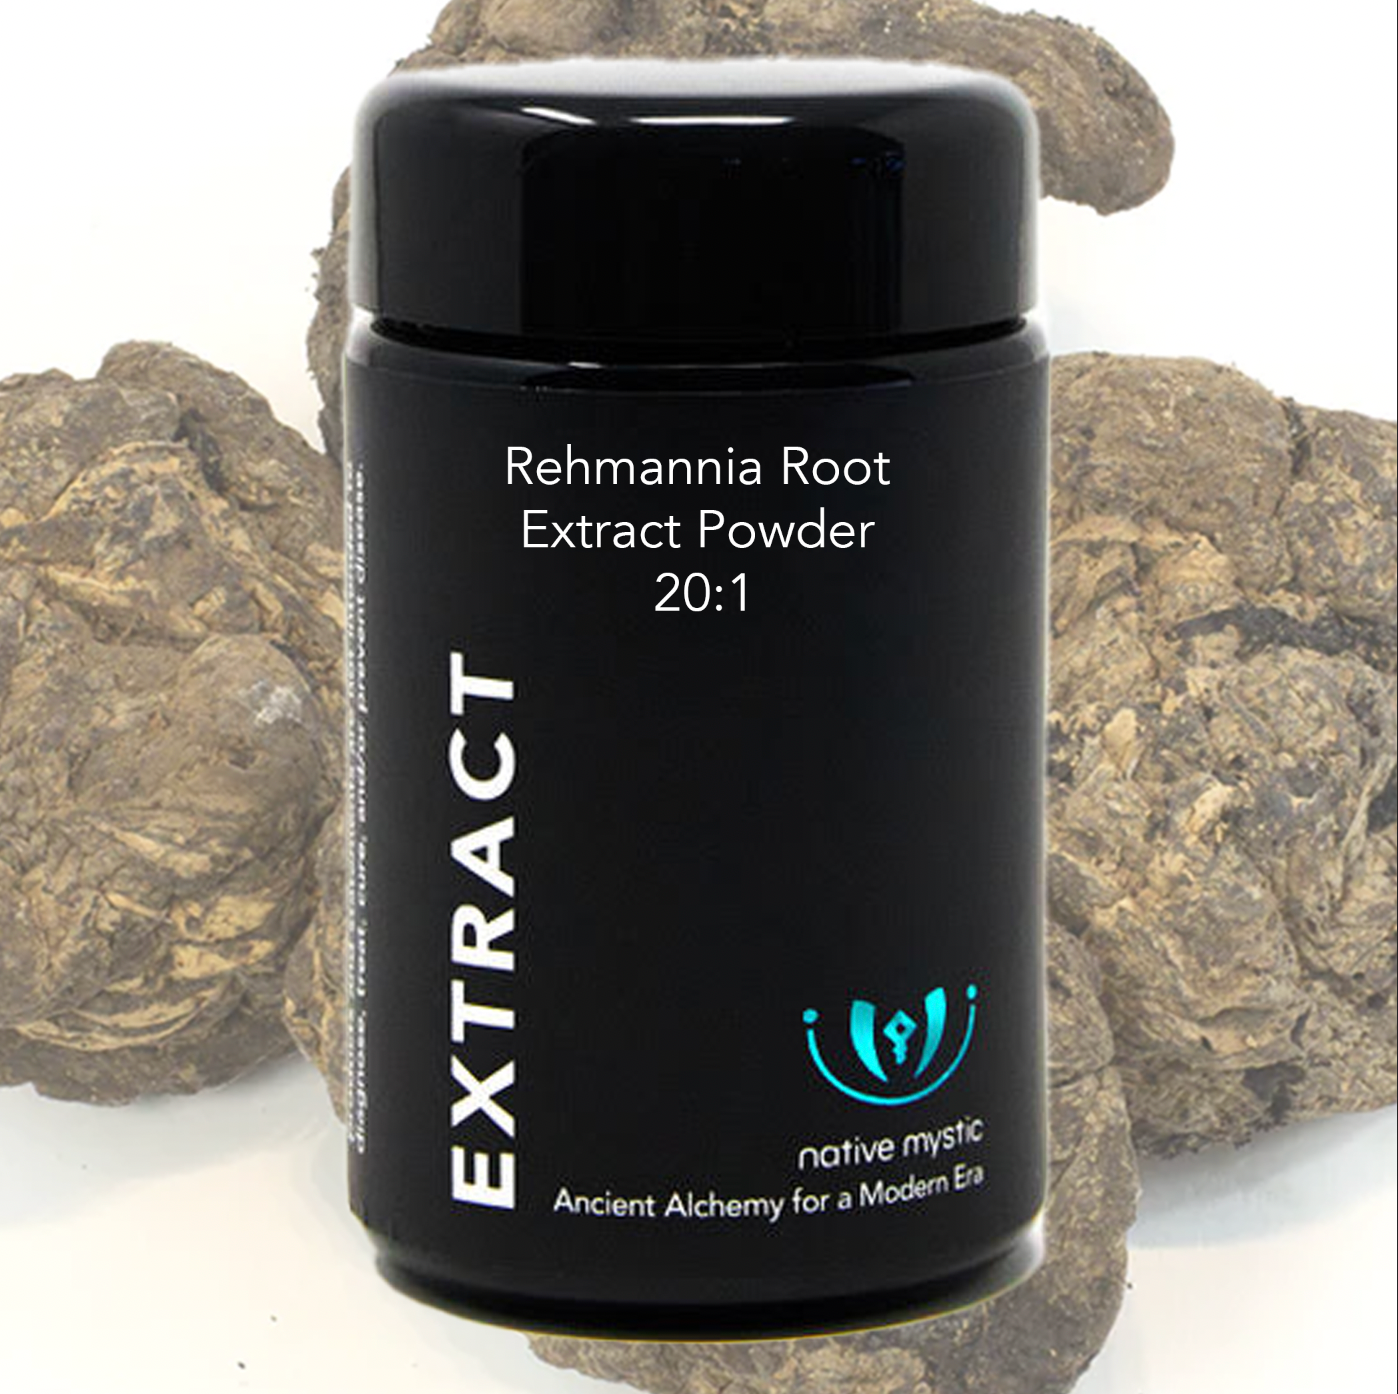 Rehmannia Root Extract Powder 20:1